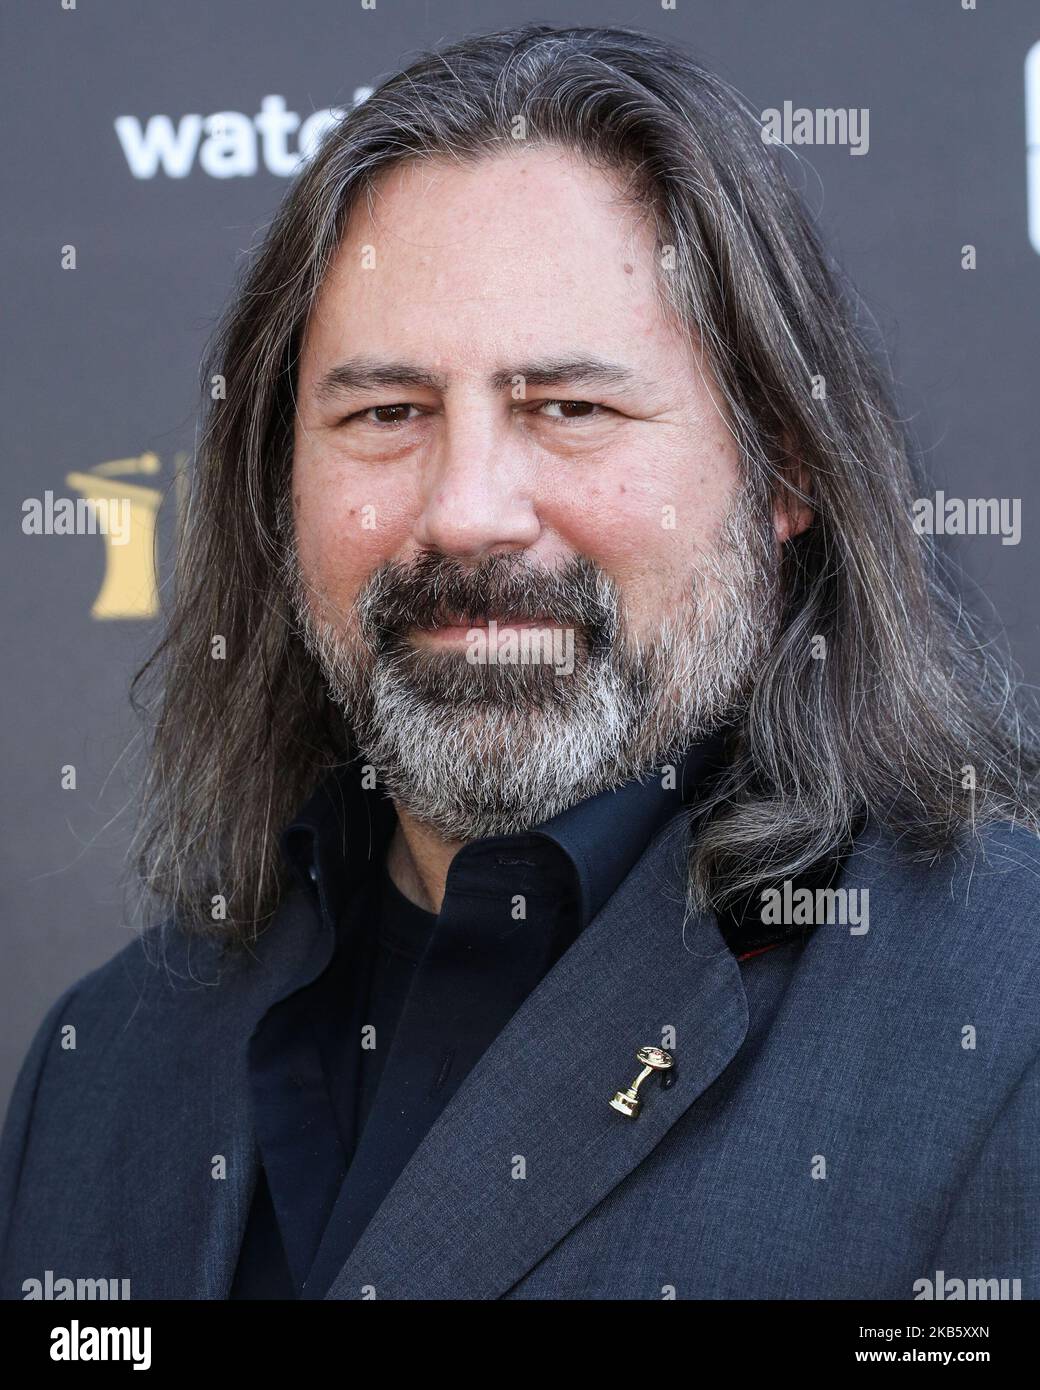 HOLLYWOOD, LOS ANGELES, CALIFORNIA, USA - SEPTEMBER 13: Paul Overacker arrives at the 45th Annual Saturn Awards held at Avalon Hollywood on September 13, 2019 in Hollywood, Los Angeles, California, United States. (Photo by David Acosta/Image Press Agency/NurPhoto) Stock Photo